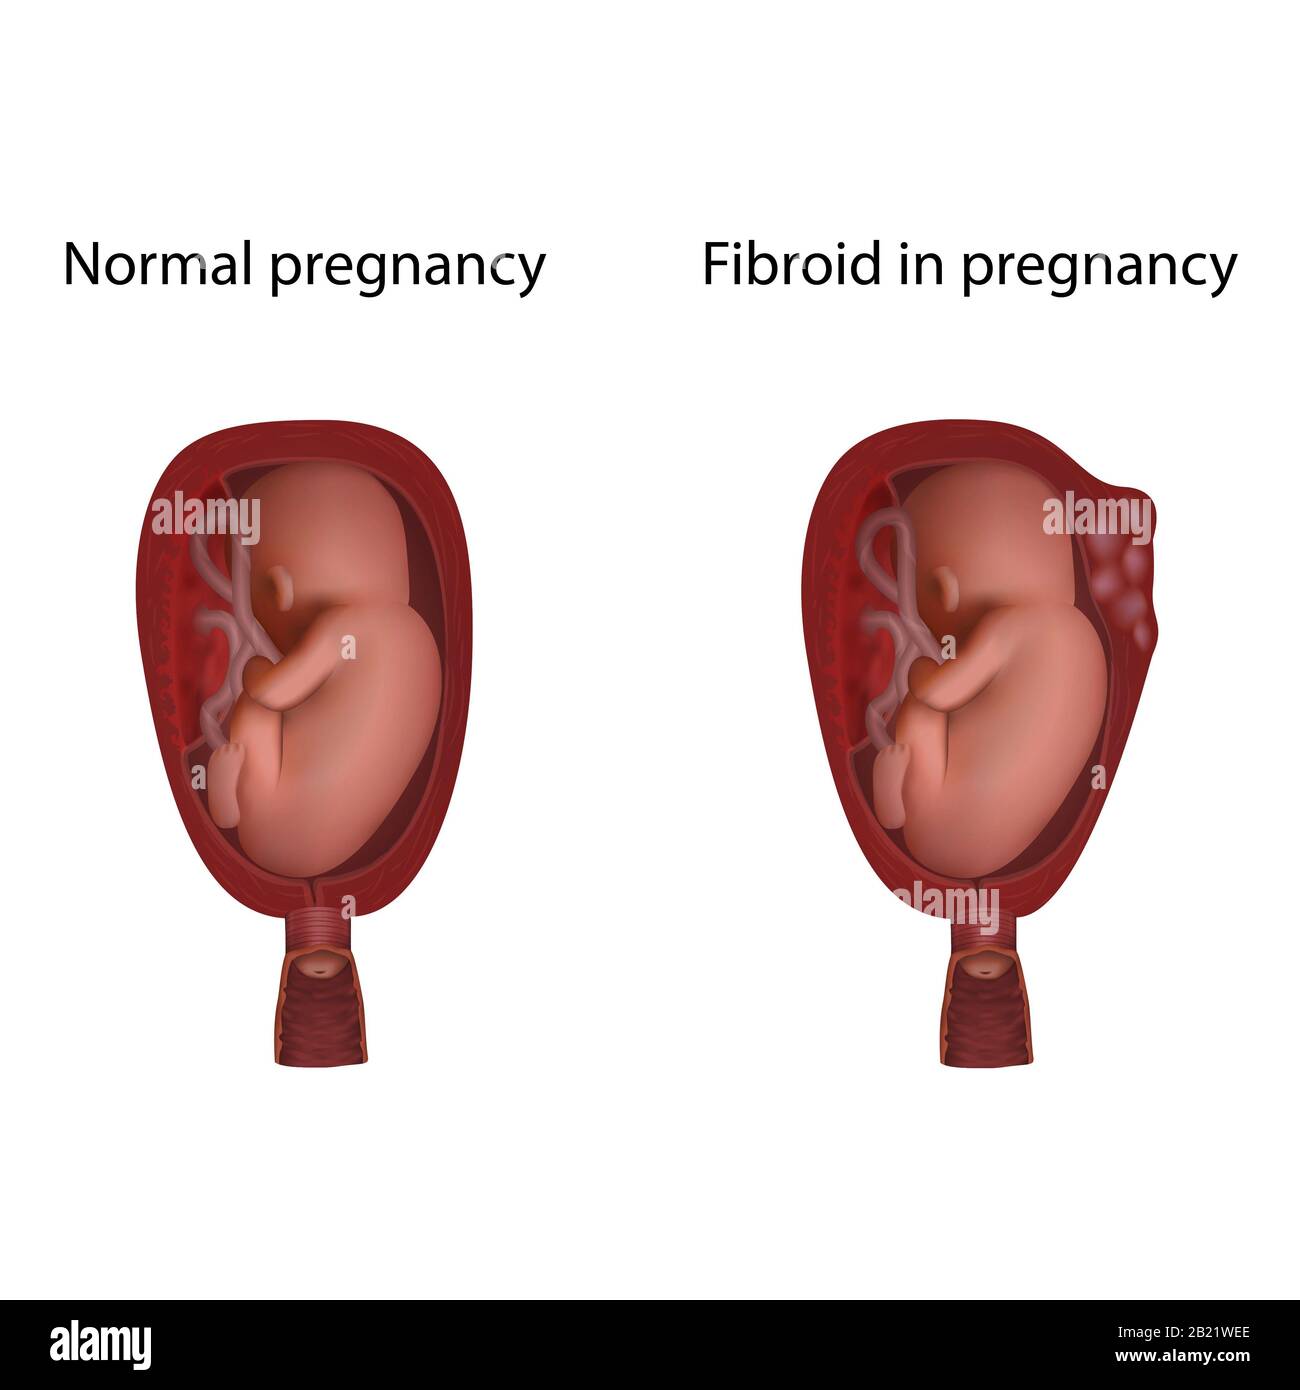 Fibroid in pregnancy and normal pregnancy, illustration Stock Photo